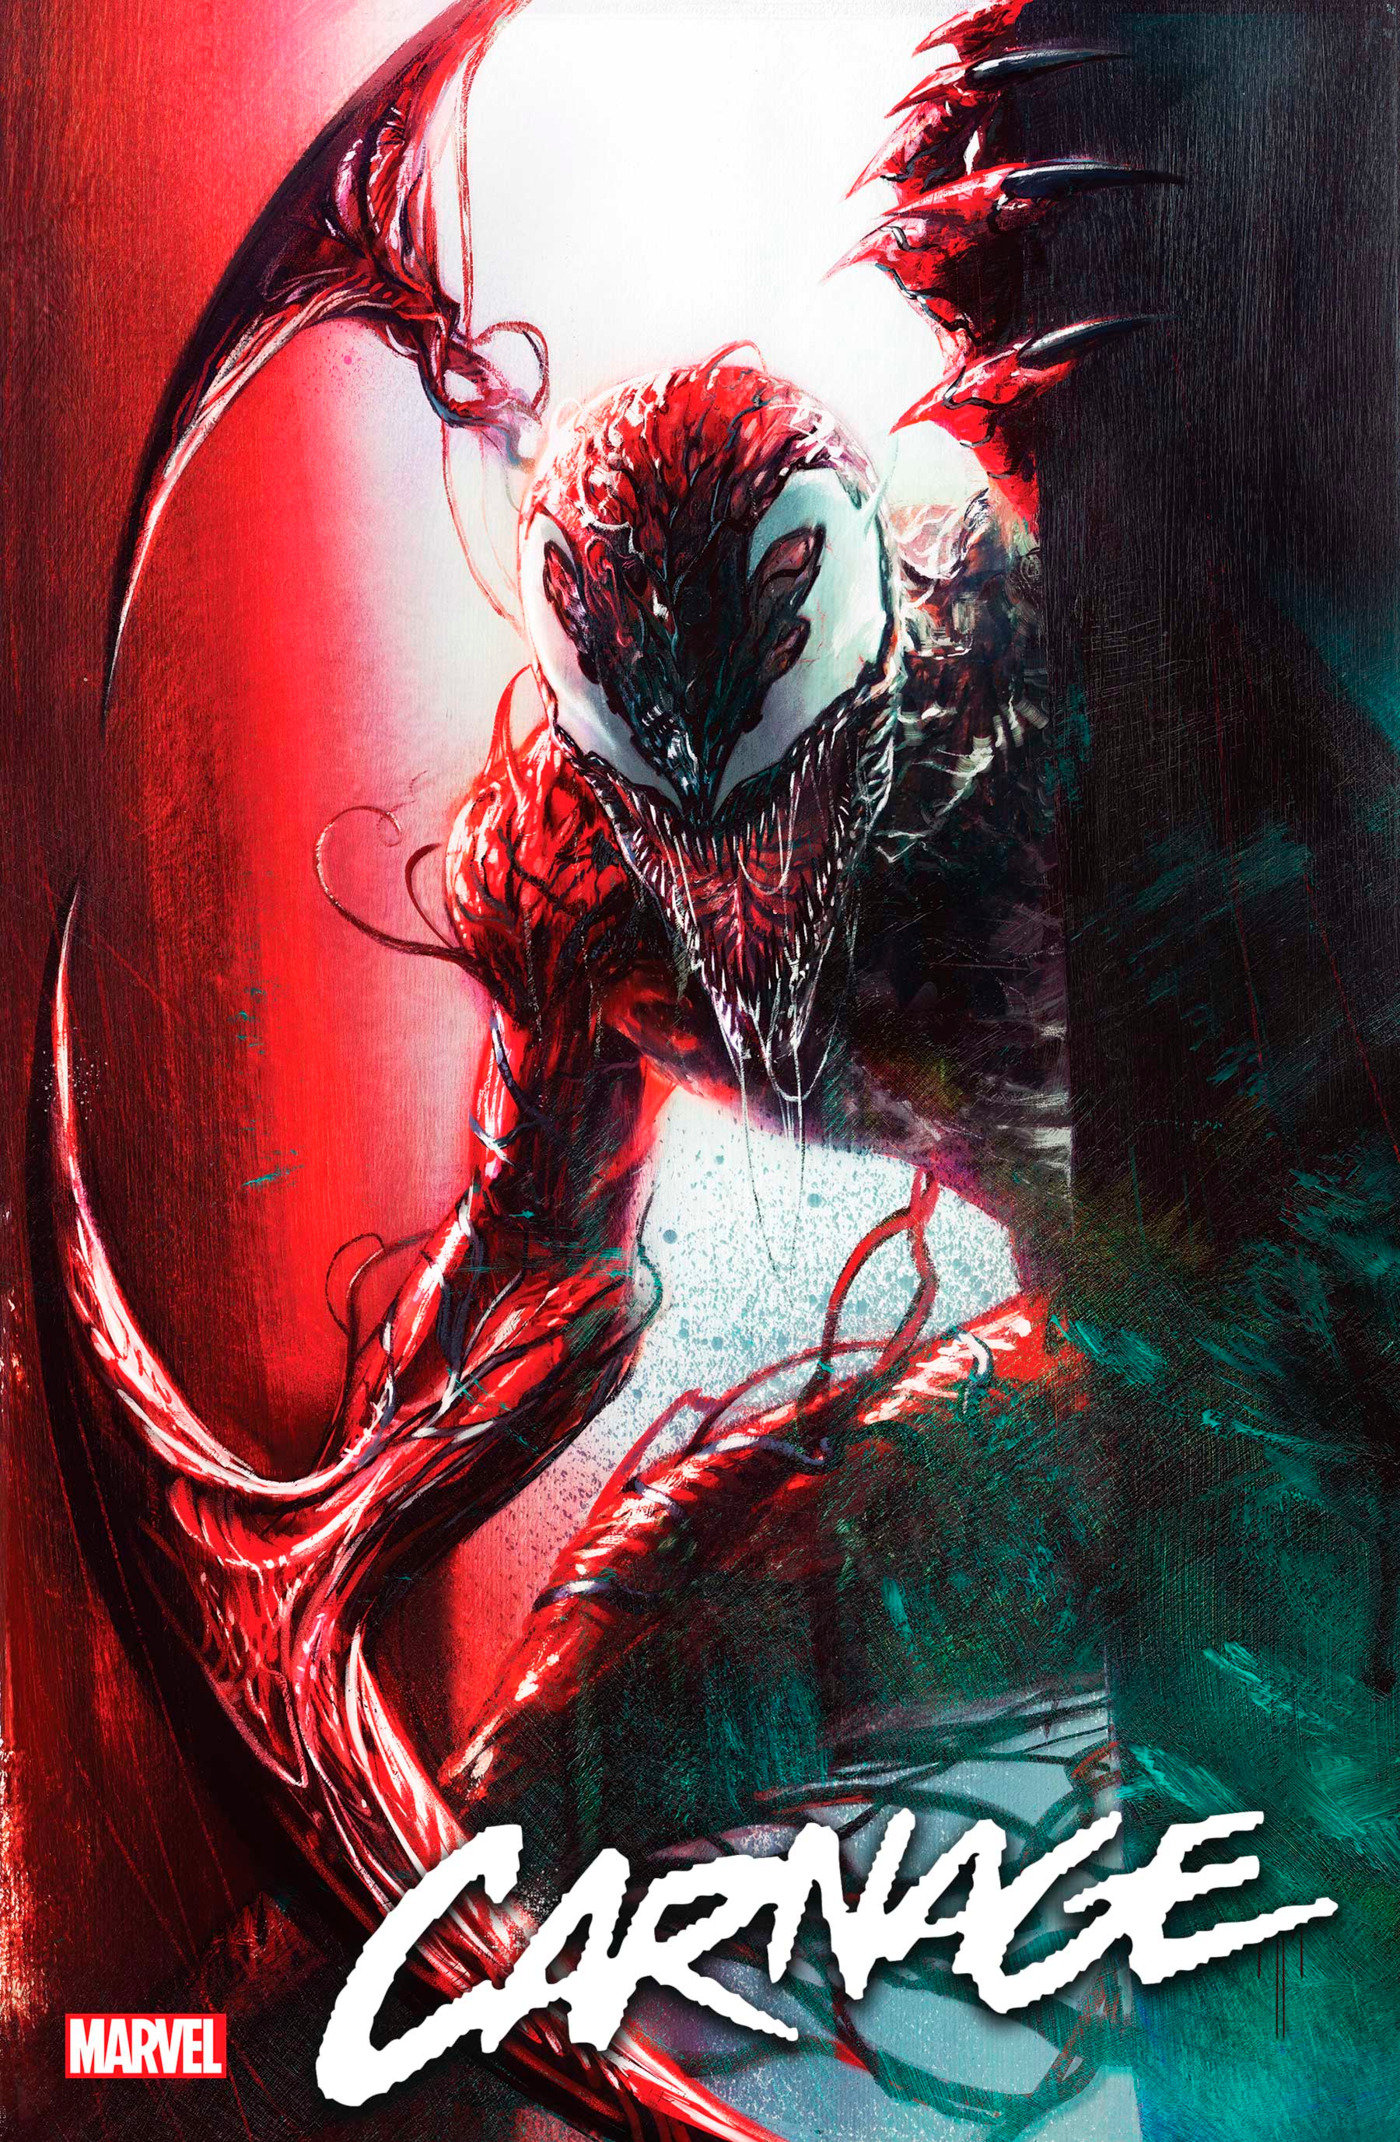 Carnage #1 Marco Mastrazzo Variant 1 for 25 Incentive